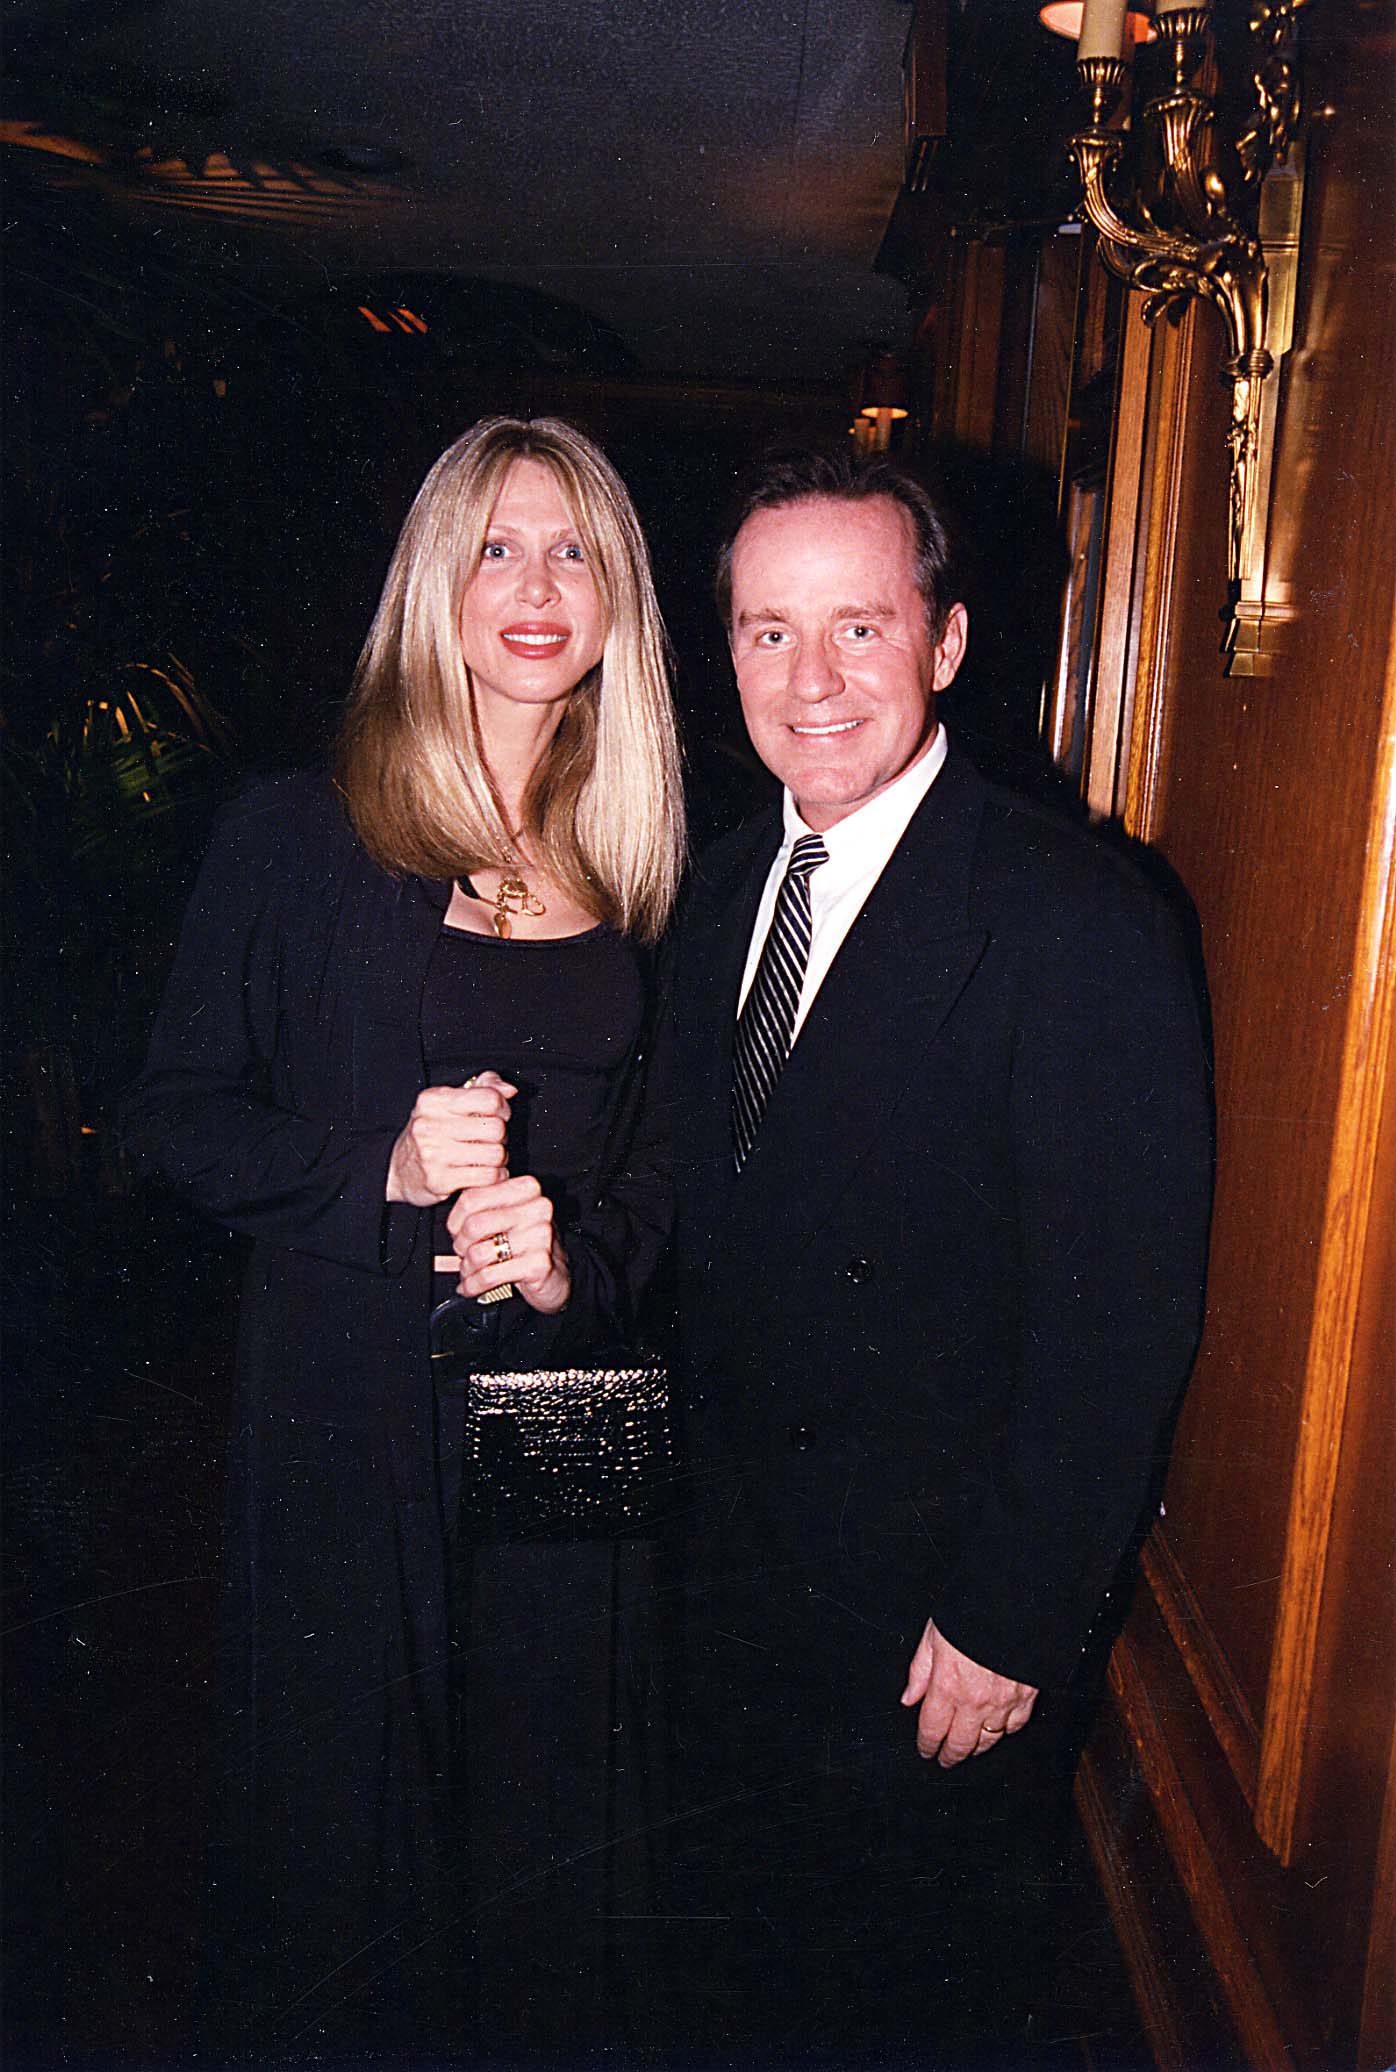 Phil Hartman & his wife Brynn in 1998 Source: Getty Images.